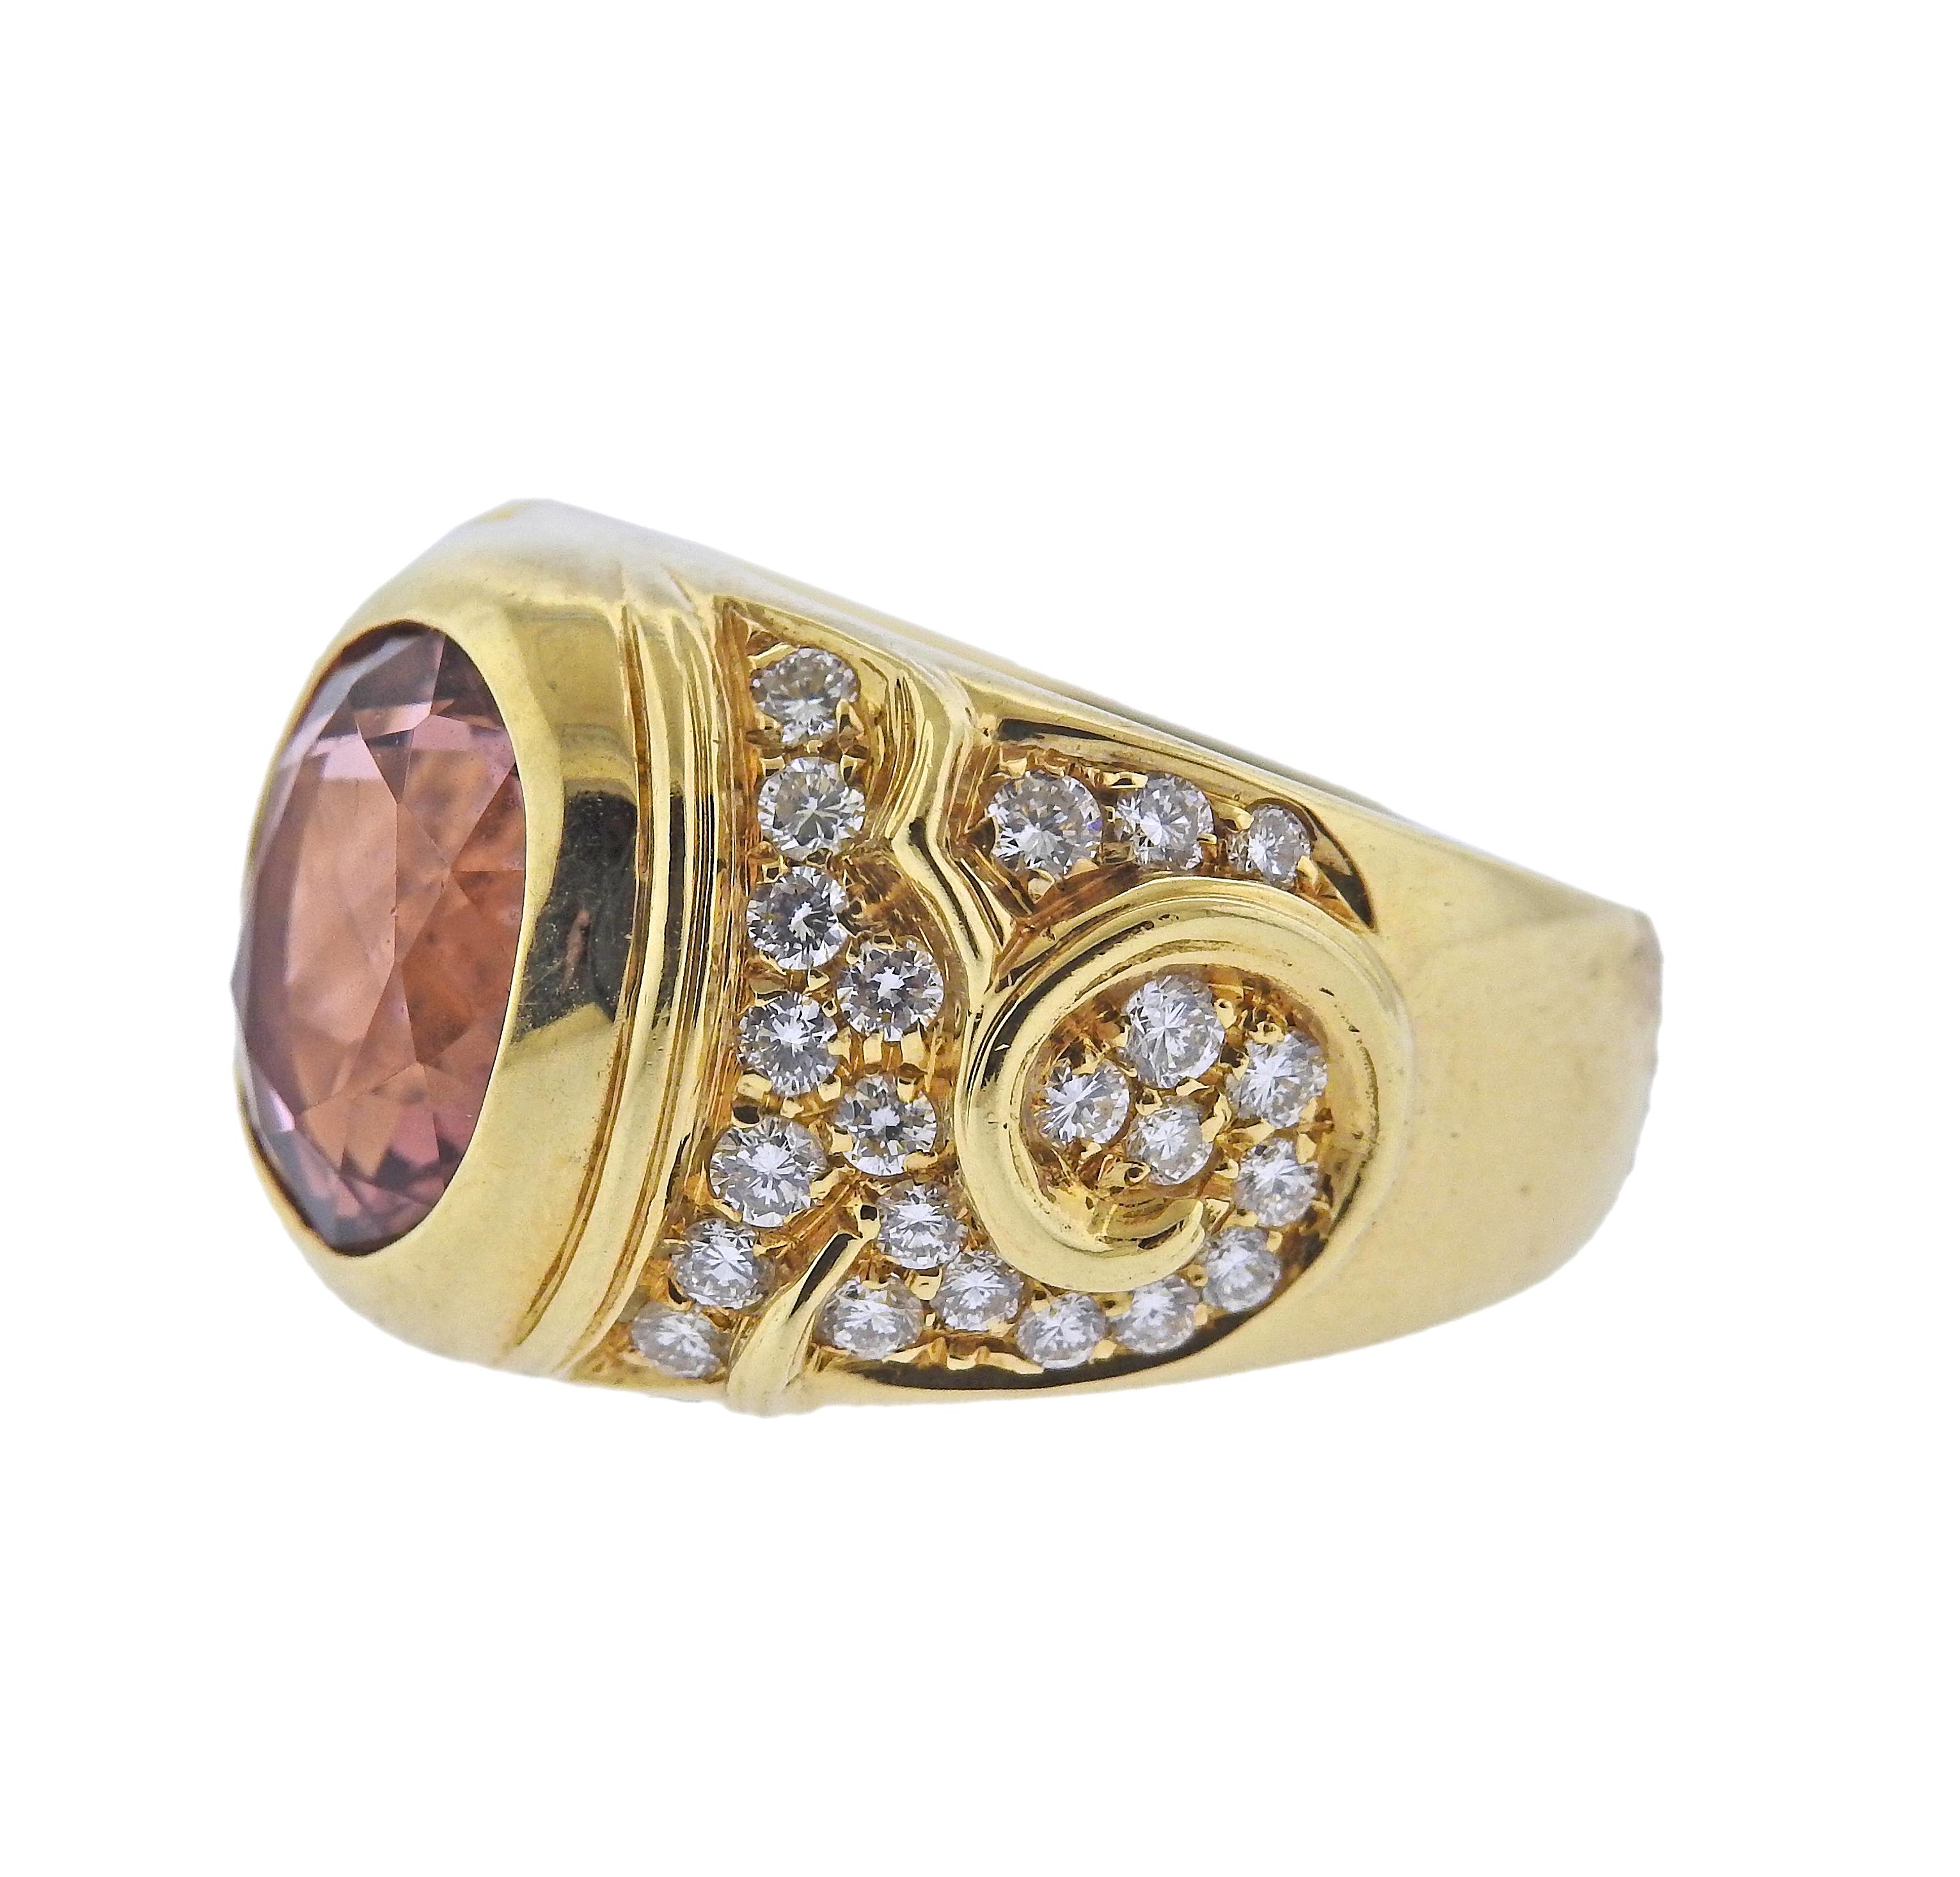 18k gold ring by Marina B, with center approx. 2.85ct pink tourmaline, surrounded with approx. 1.20ctw in G/VS diamonds. Ring size - 7, open cuff design. Top is 14mm wide. Marked: Marian B, MB, C2144, 750. Weight - 13.4 grams.